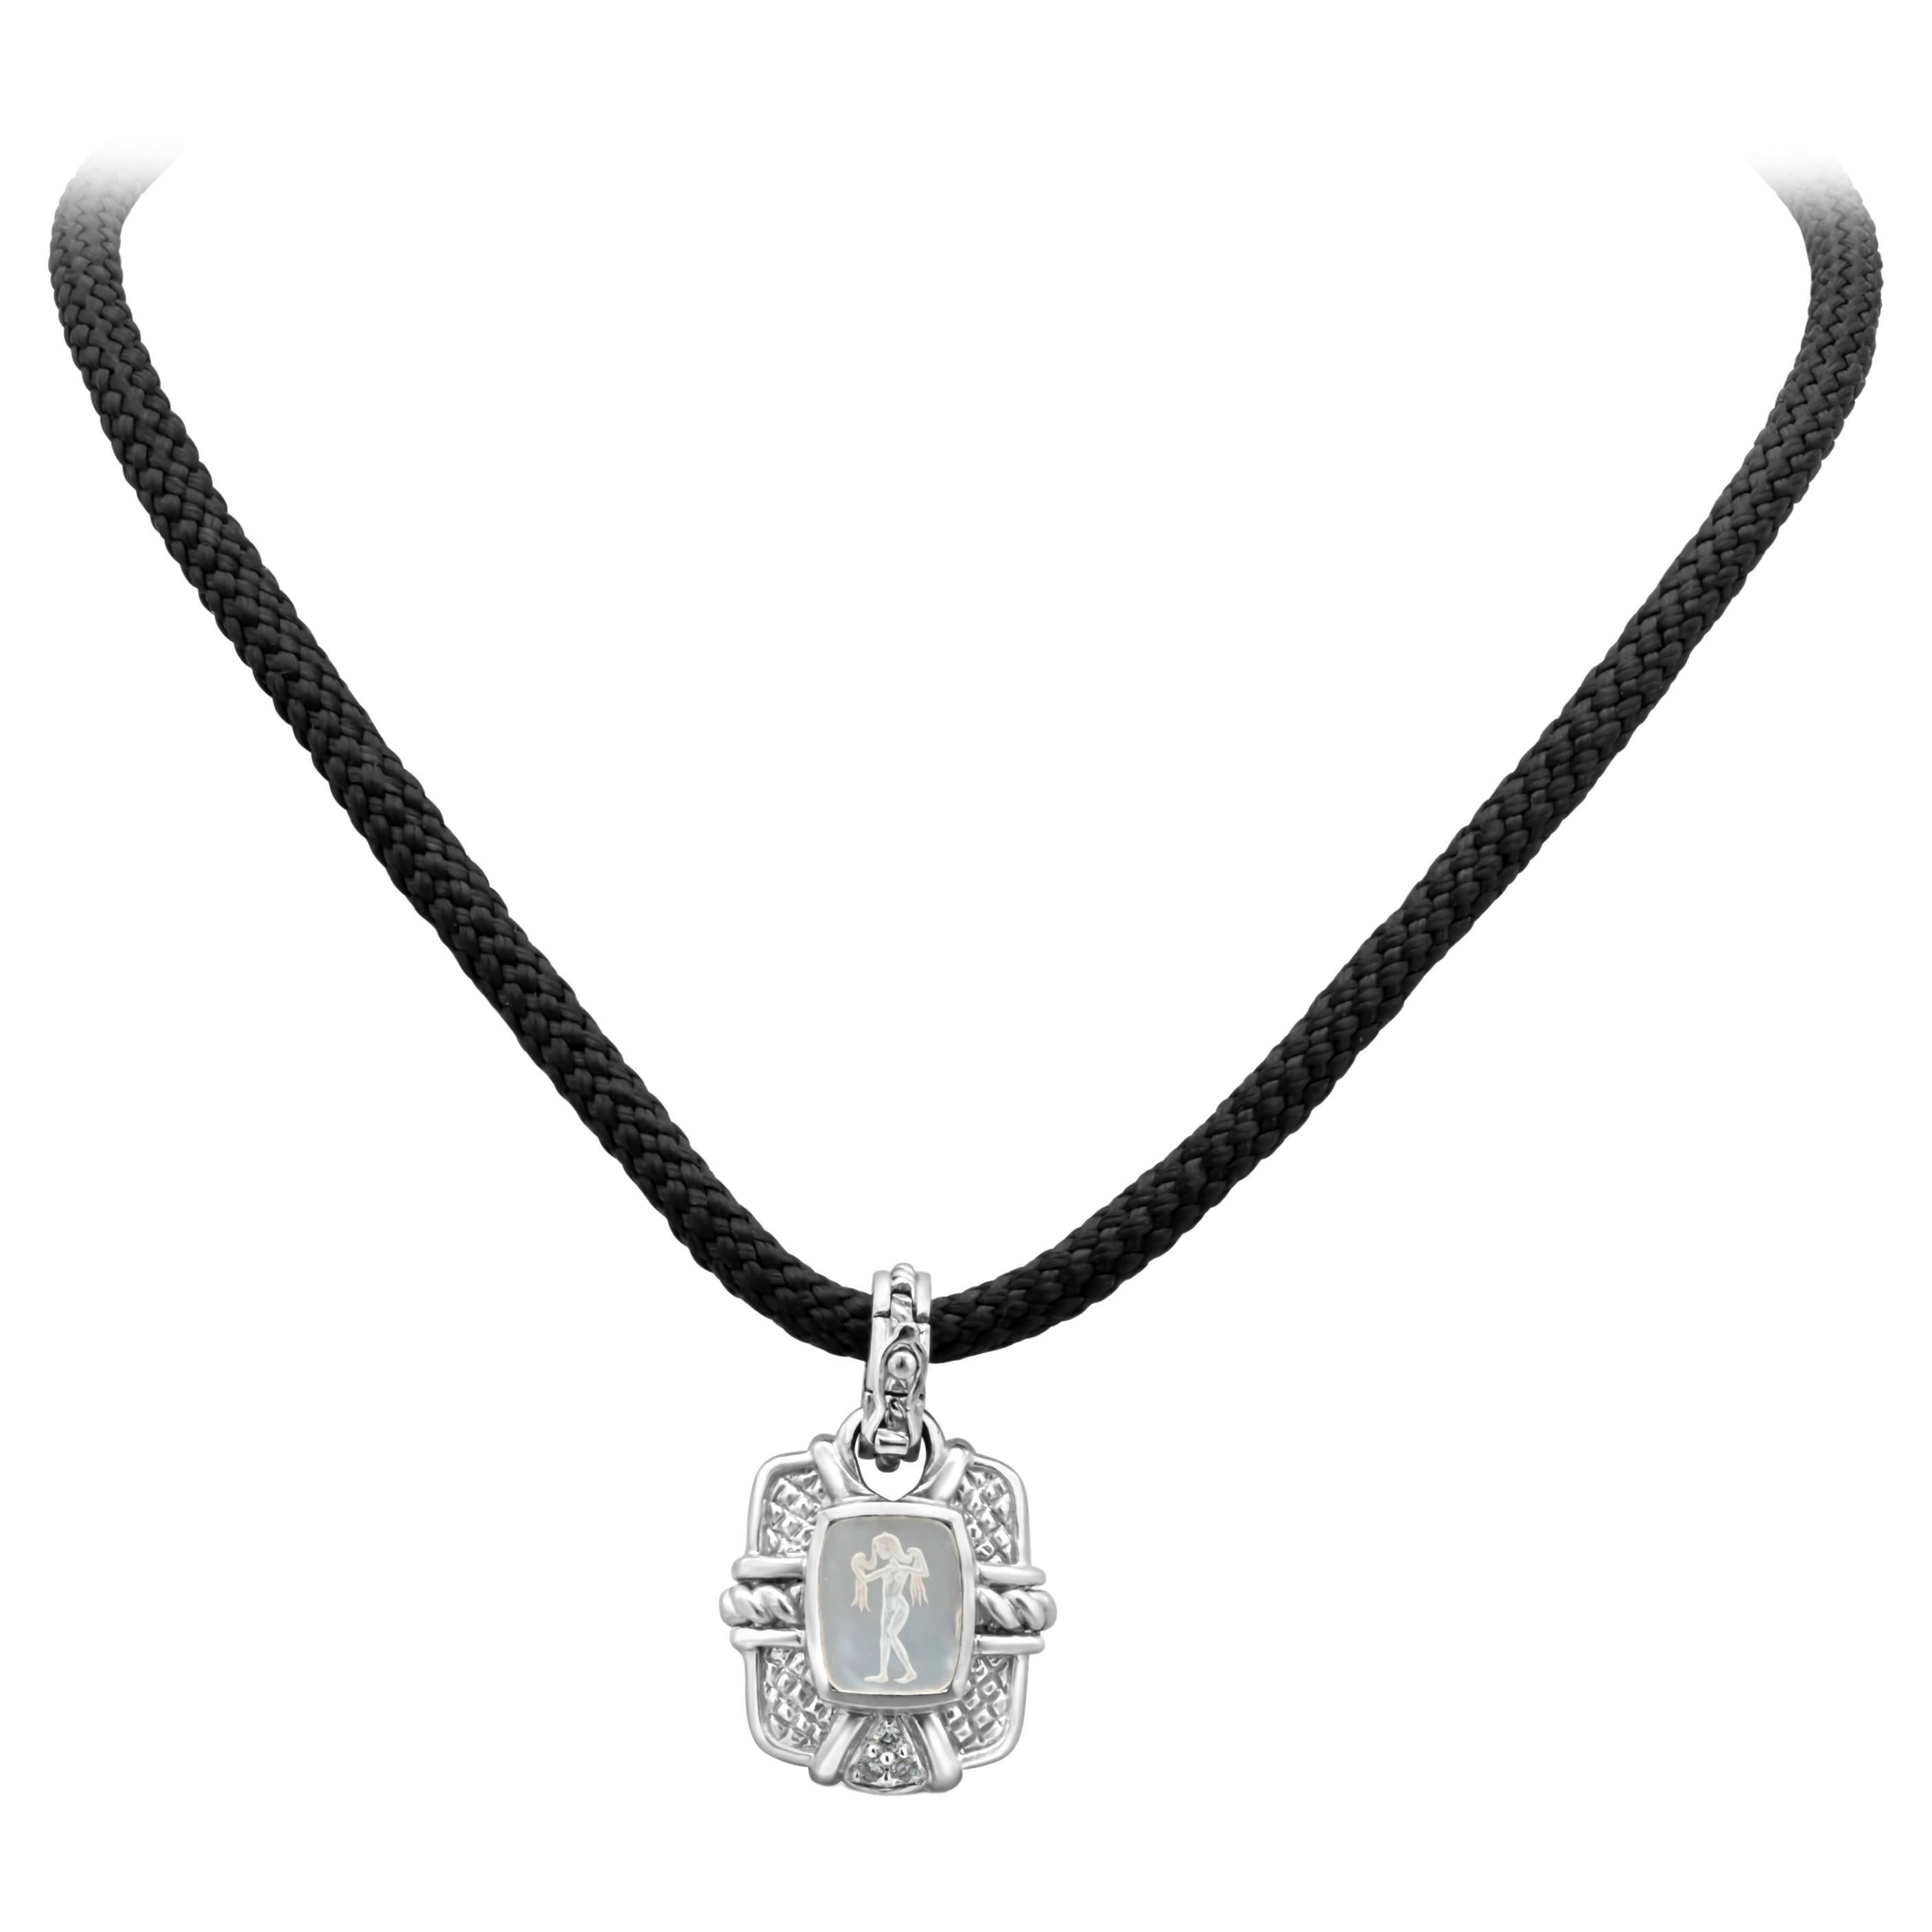 Judith Ripka Black Silk String Necklace with Antique White Gold Pendant